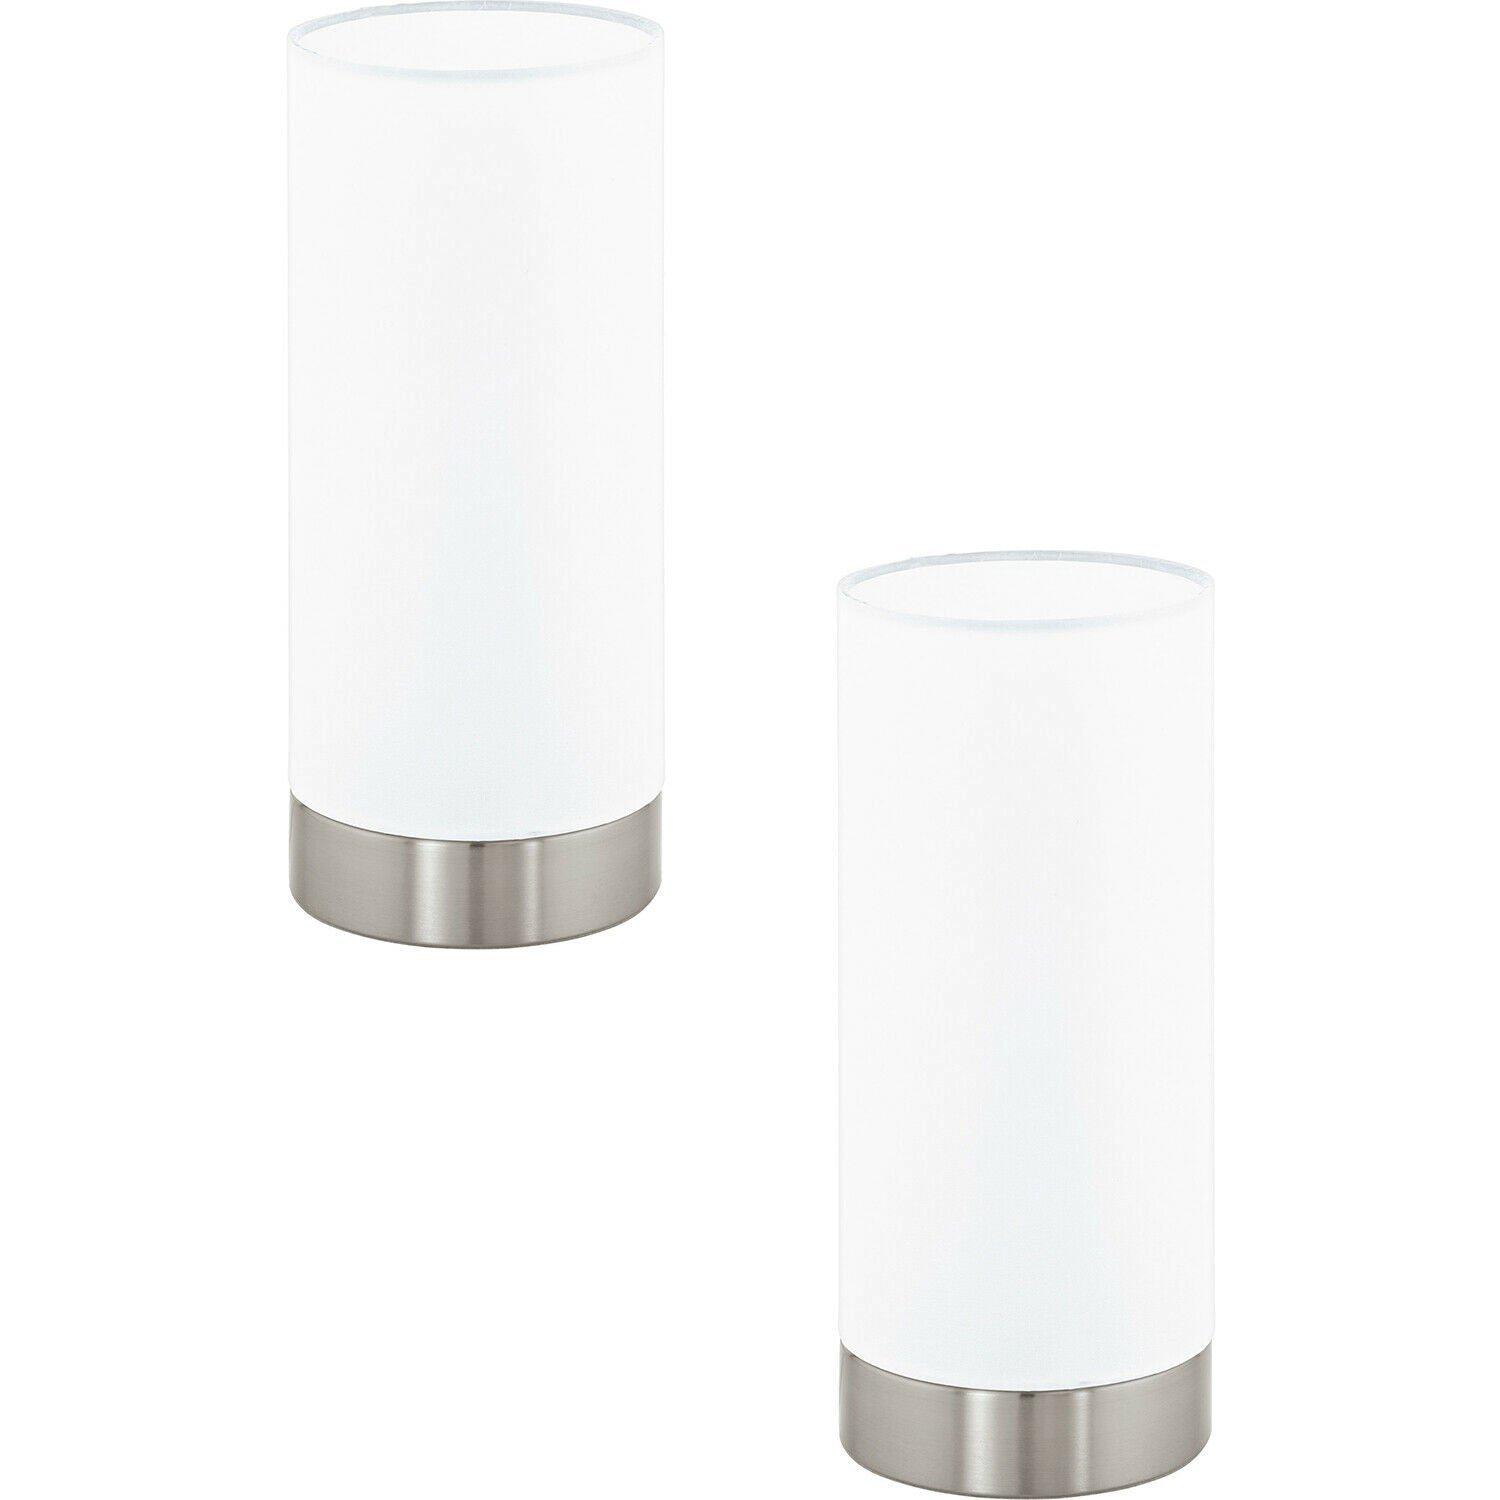 2 PACK Table Lamp Colour Satin Nickel Shade White Fabric Touch On/Off E27 1x40W